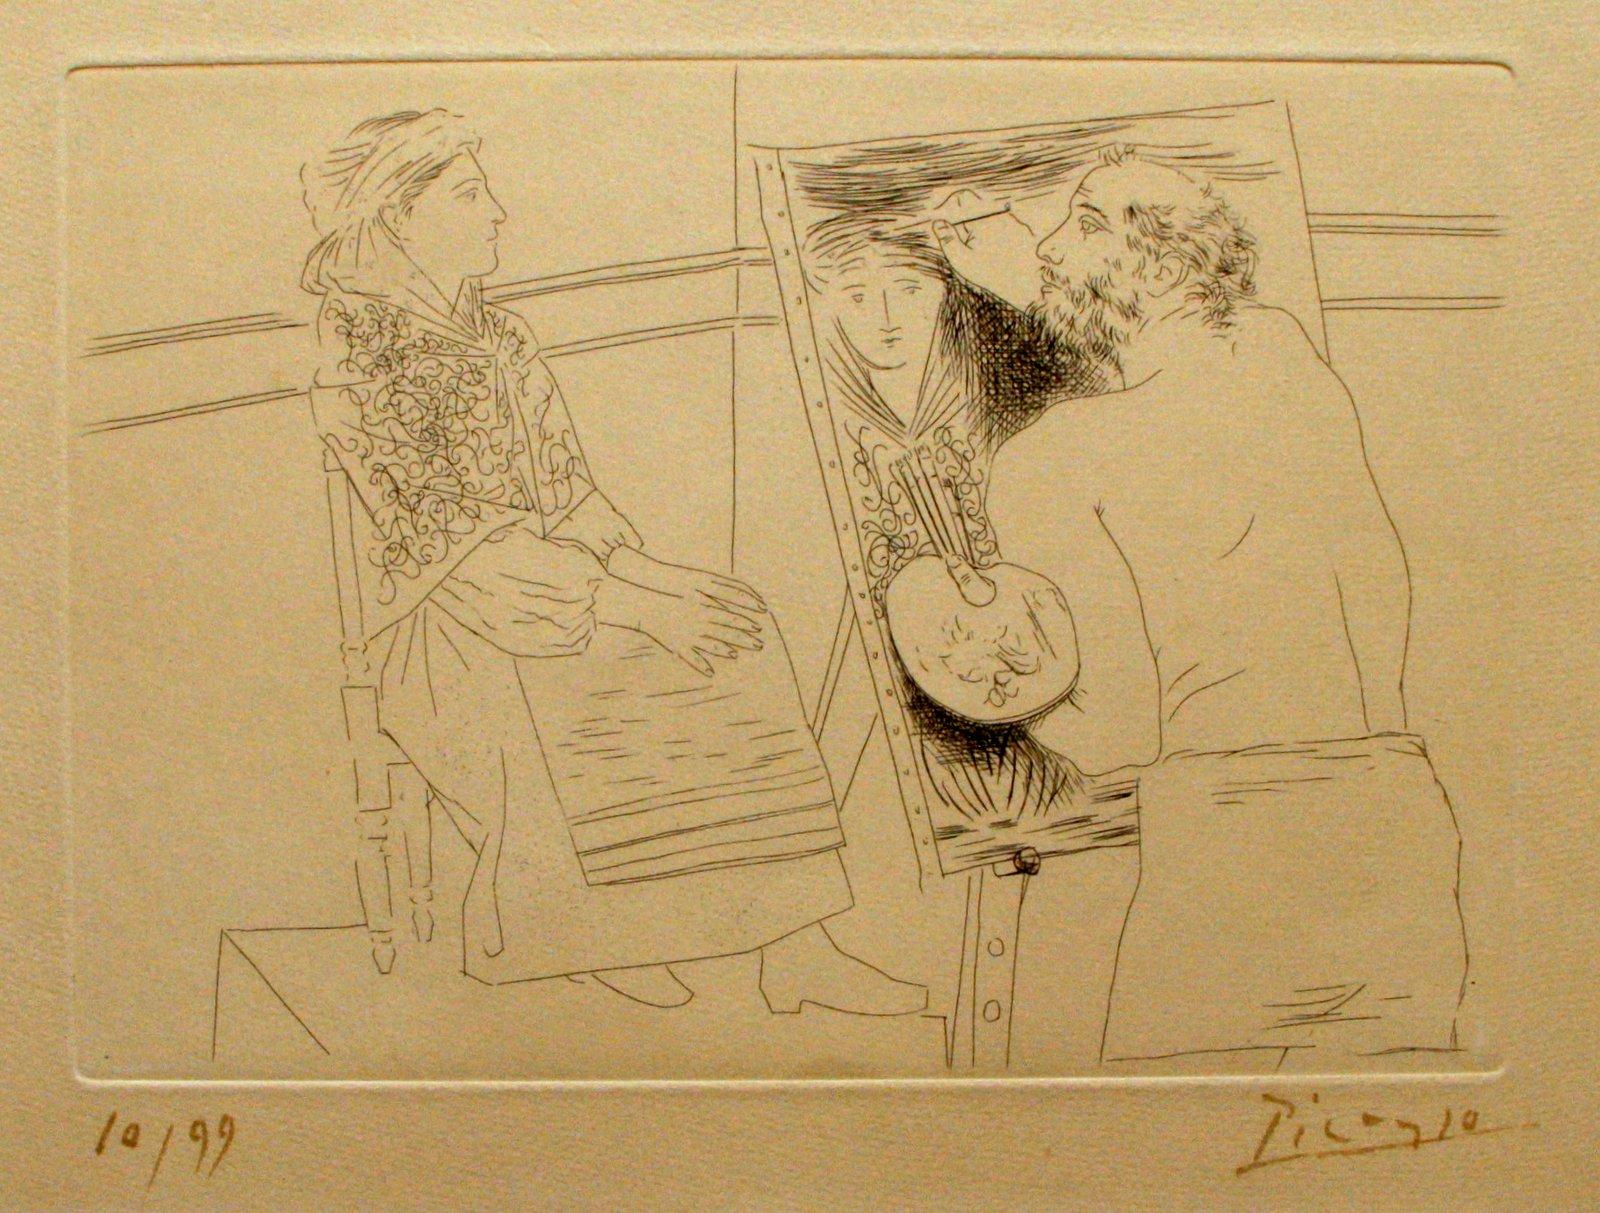 Etching from "Le Chef-d'Oeuvre Inconnu", published in 1927 in 99 pieces.
One of 99 prints, numbered and hand signed.
Rare and in very good conditions.

Bibliography:
G. Bloch, Picasso: Catalog of the Printed Graphic work 1904-1967, Kornfeld et